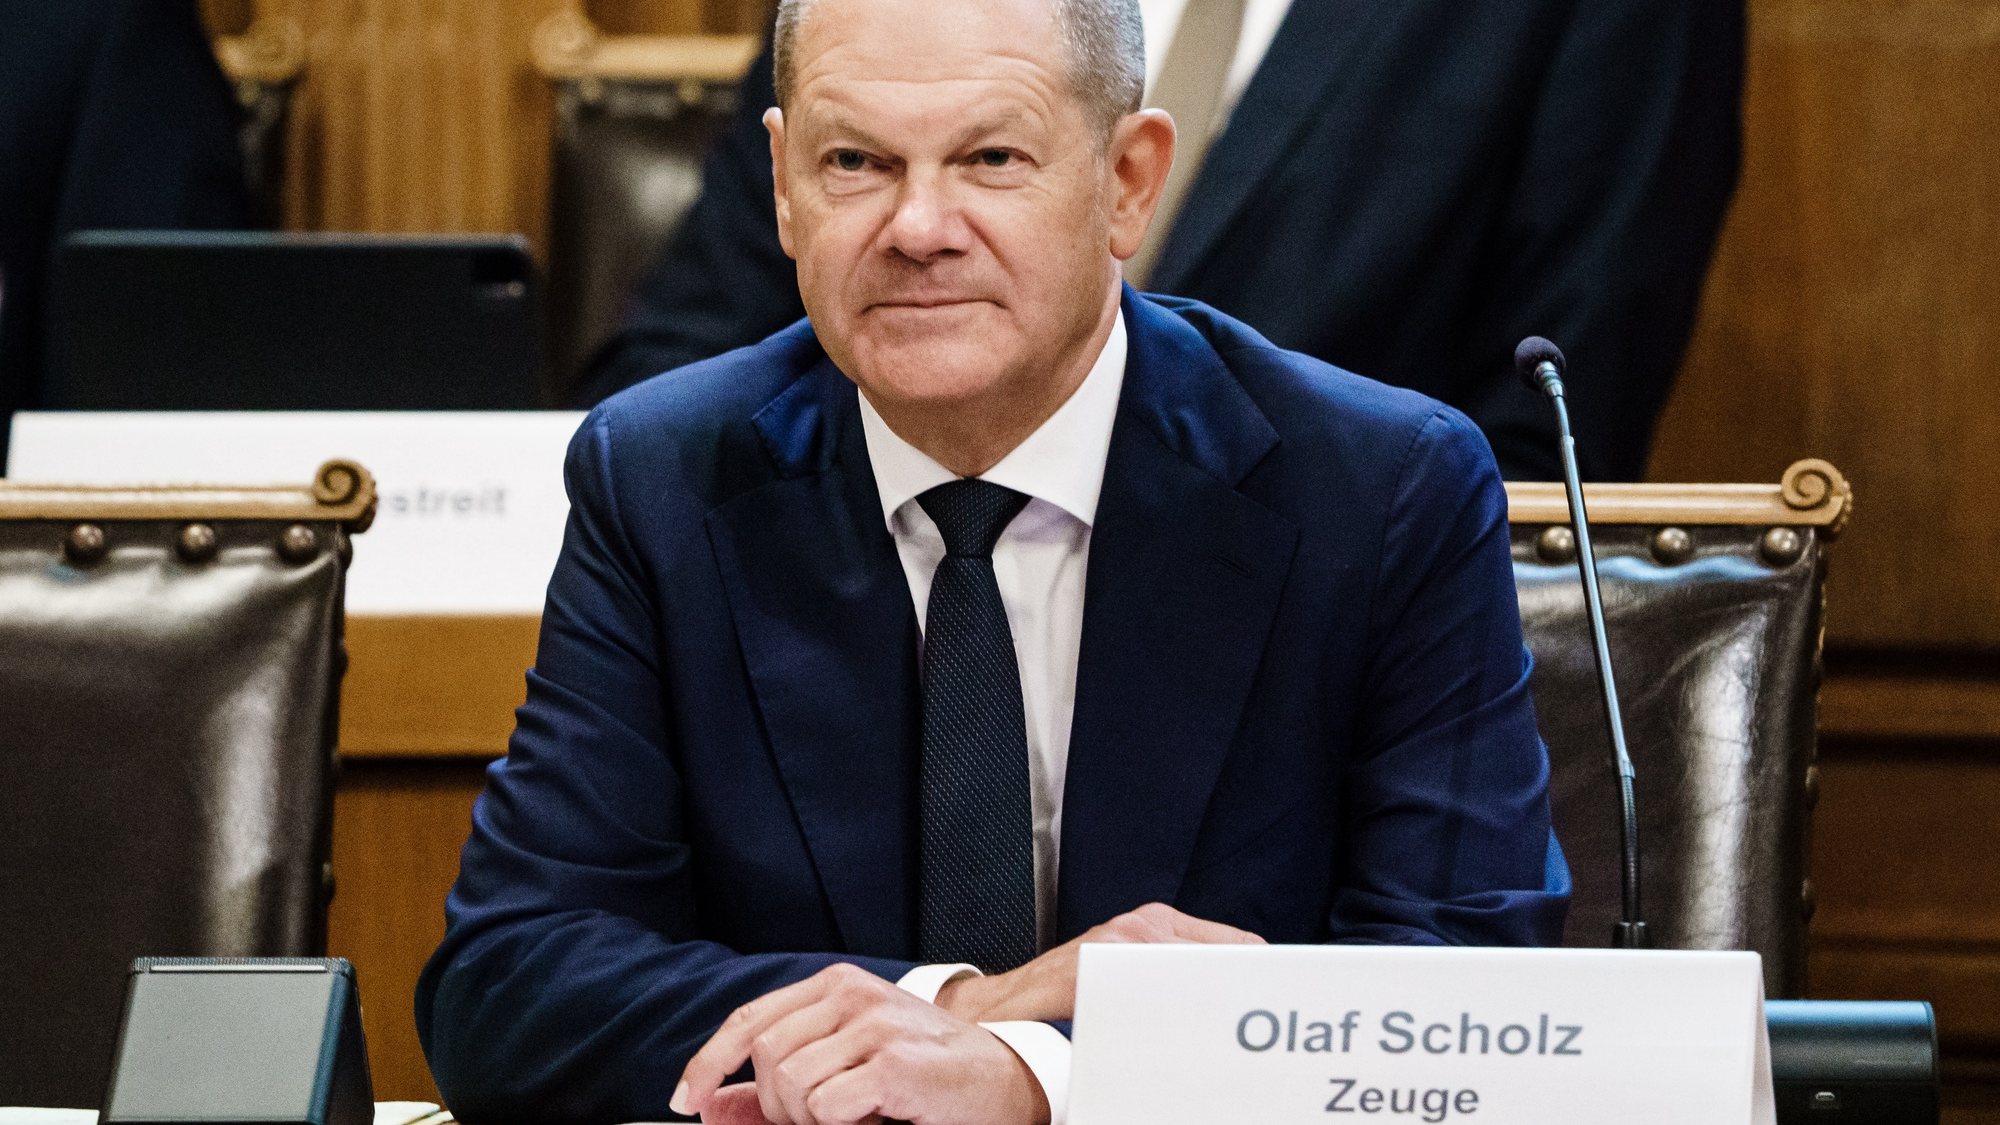 epa10129029 German Chancellor Olaf Scholz attends the Hamburg CumEx inquiry committee at the Hamburg town hall in Hamburg, Germany, 19 August 2022. German Chancellor Olaf Scholz needs to testify in front of Hamburg parliamentary committee of Inquiry &#039;Cum-Ex Tax Money Affair&#039; regarding a possible limitation of claim of taxpayers&#039; money and political influence exerted.  EPA/CLEMENS BILAN